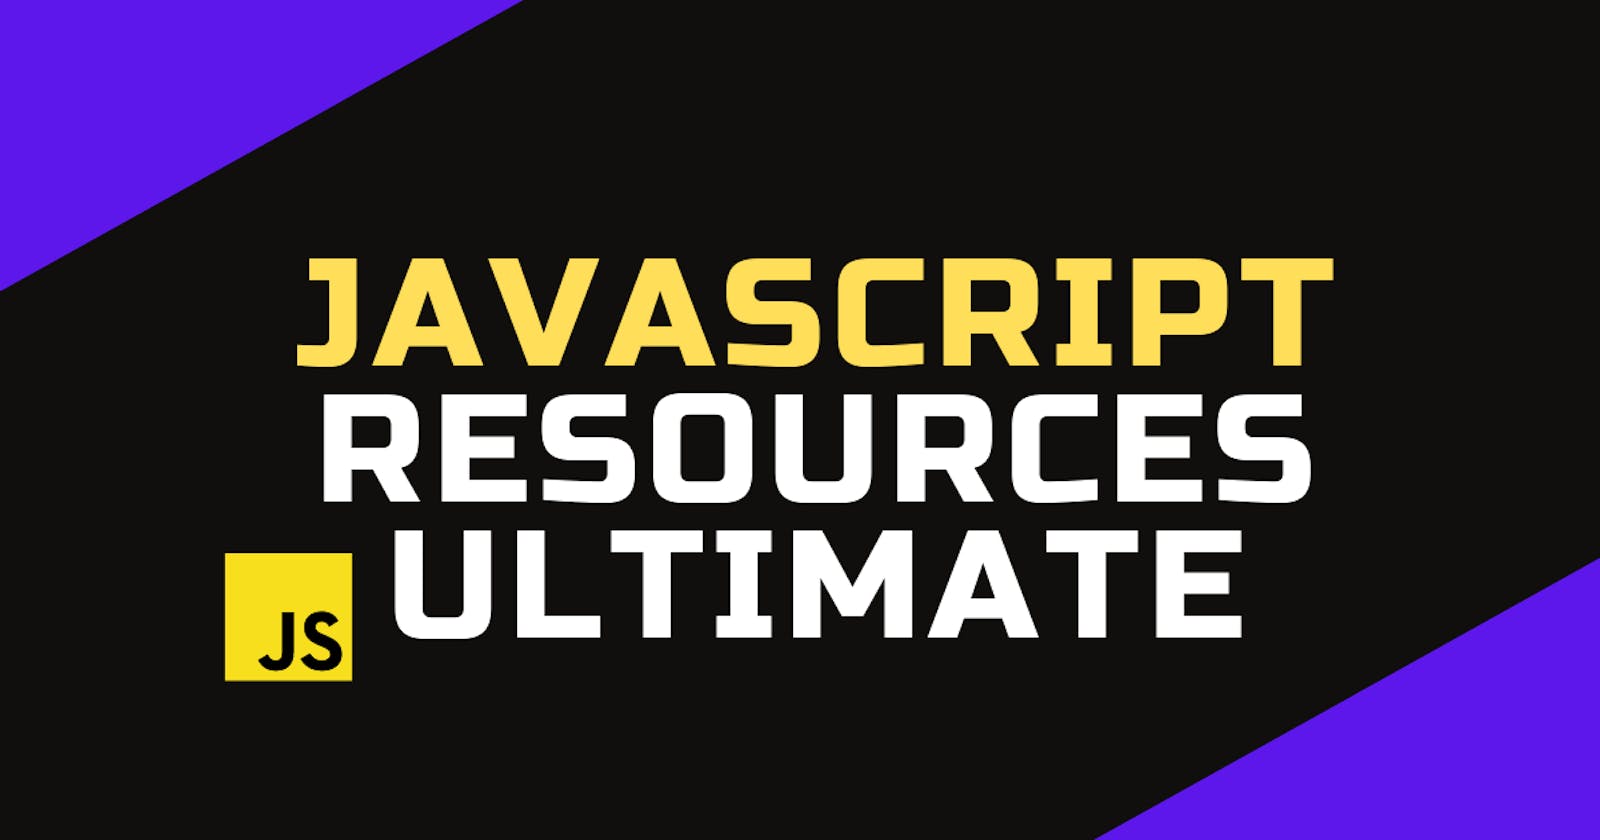 The ultimate and free JavaScript resources